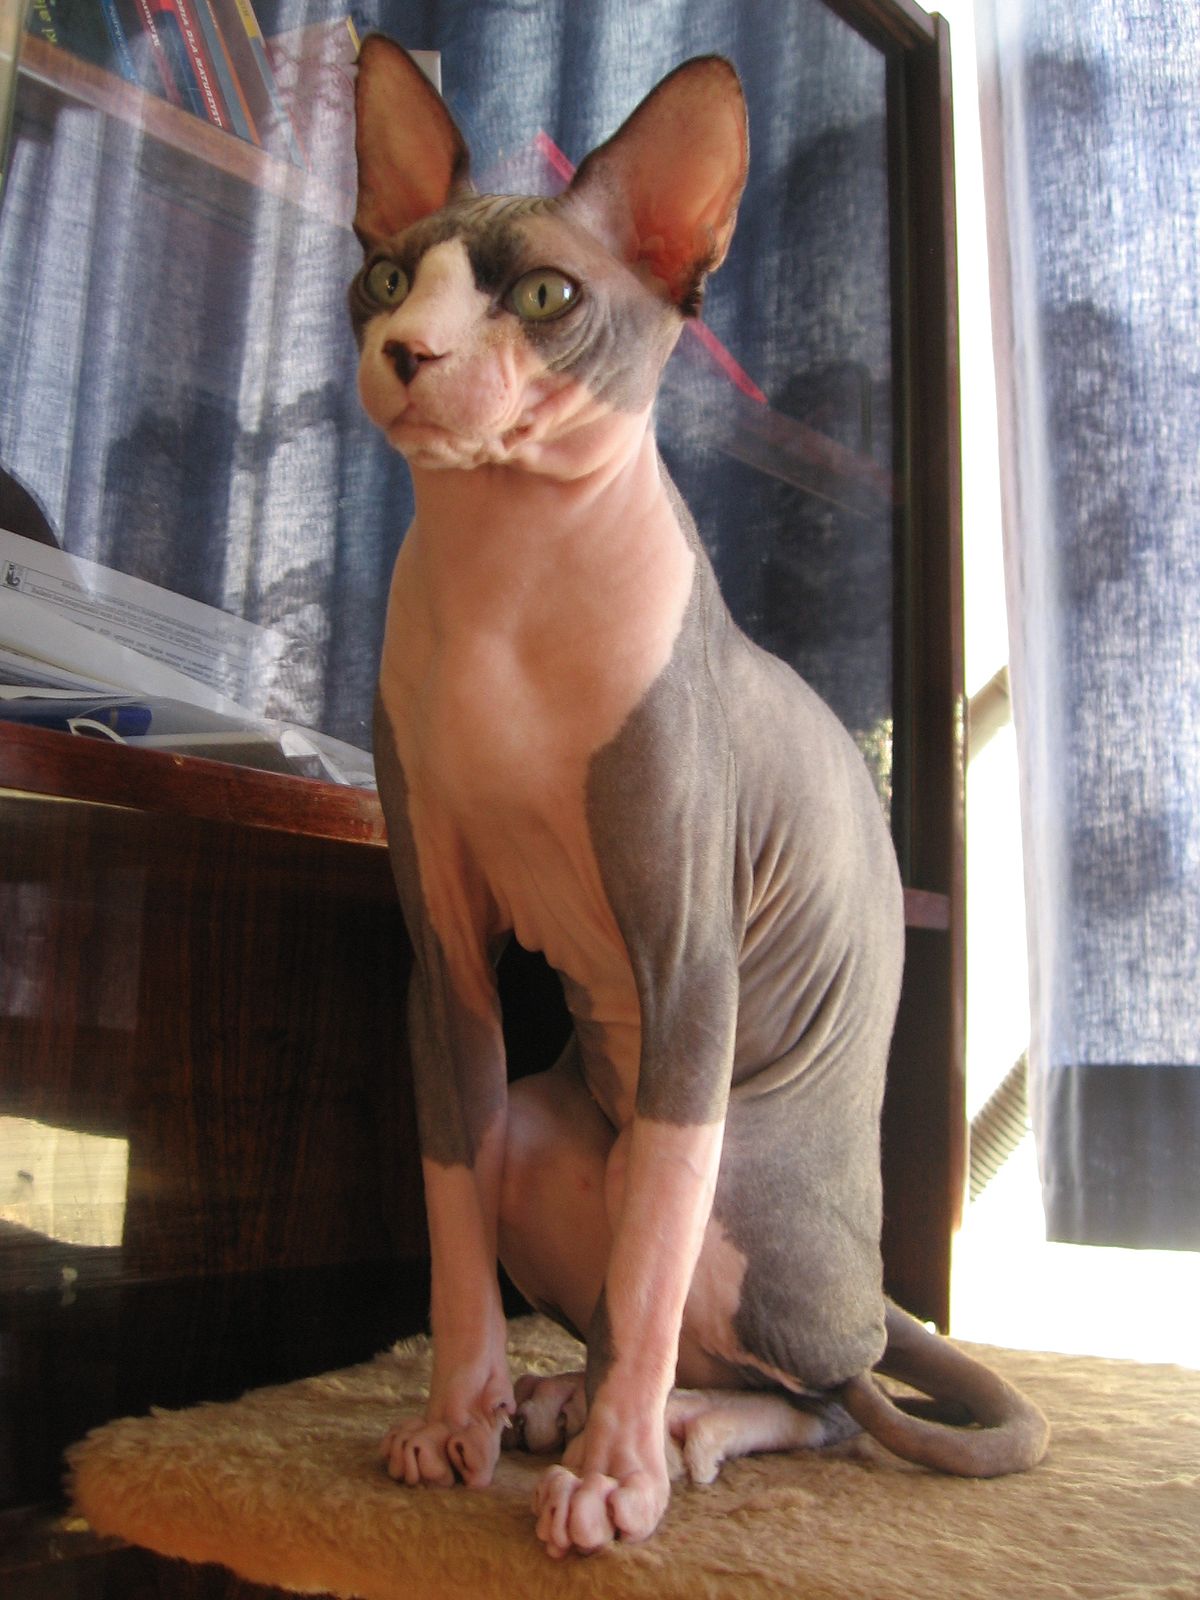 How did the hairless cat come about?